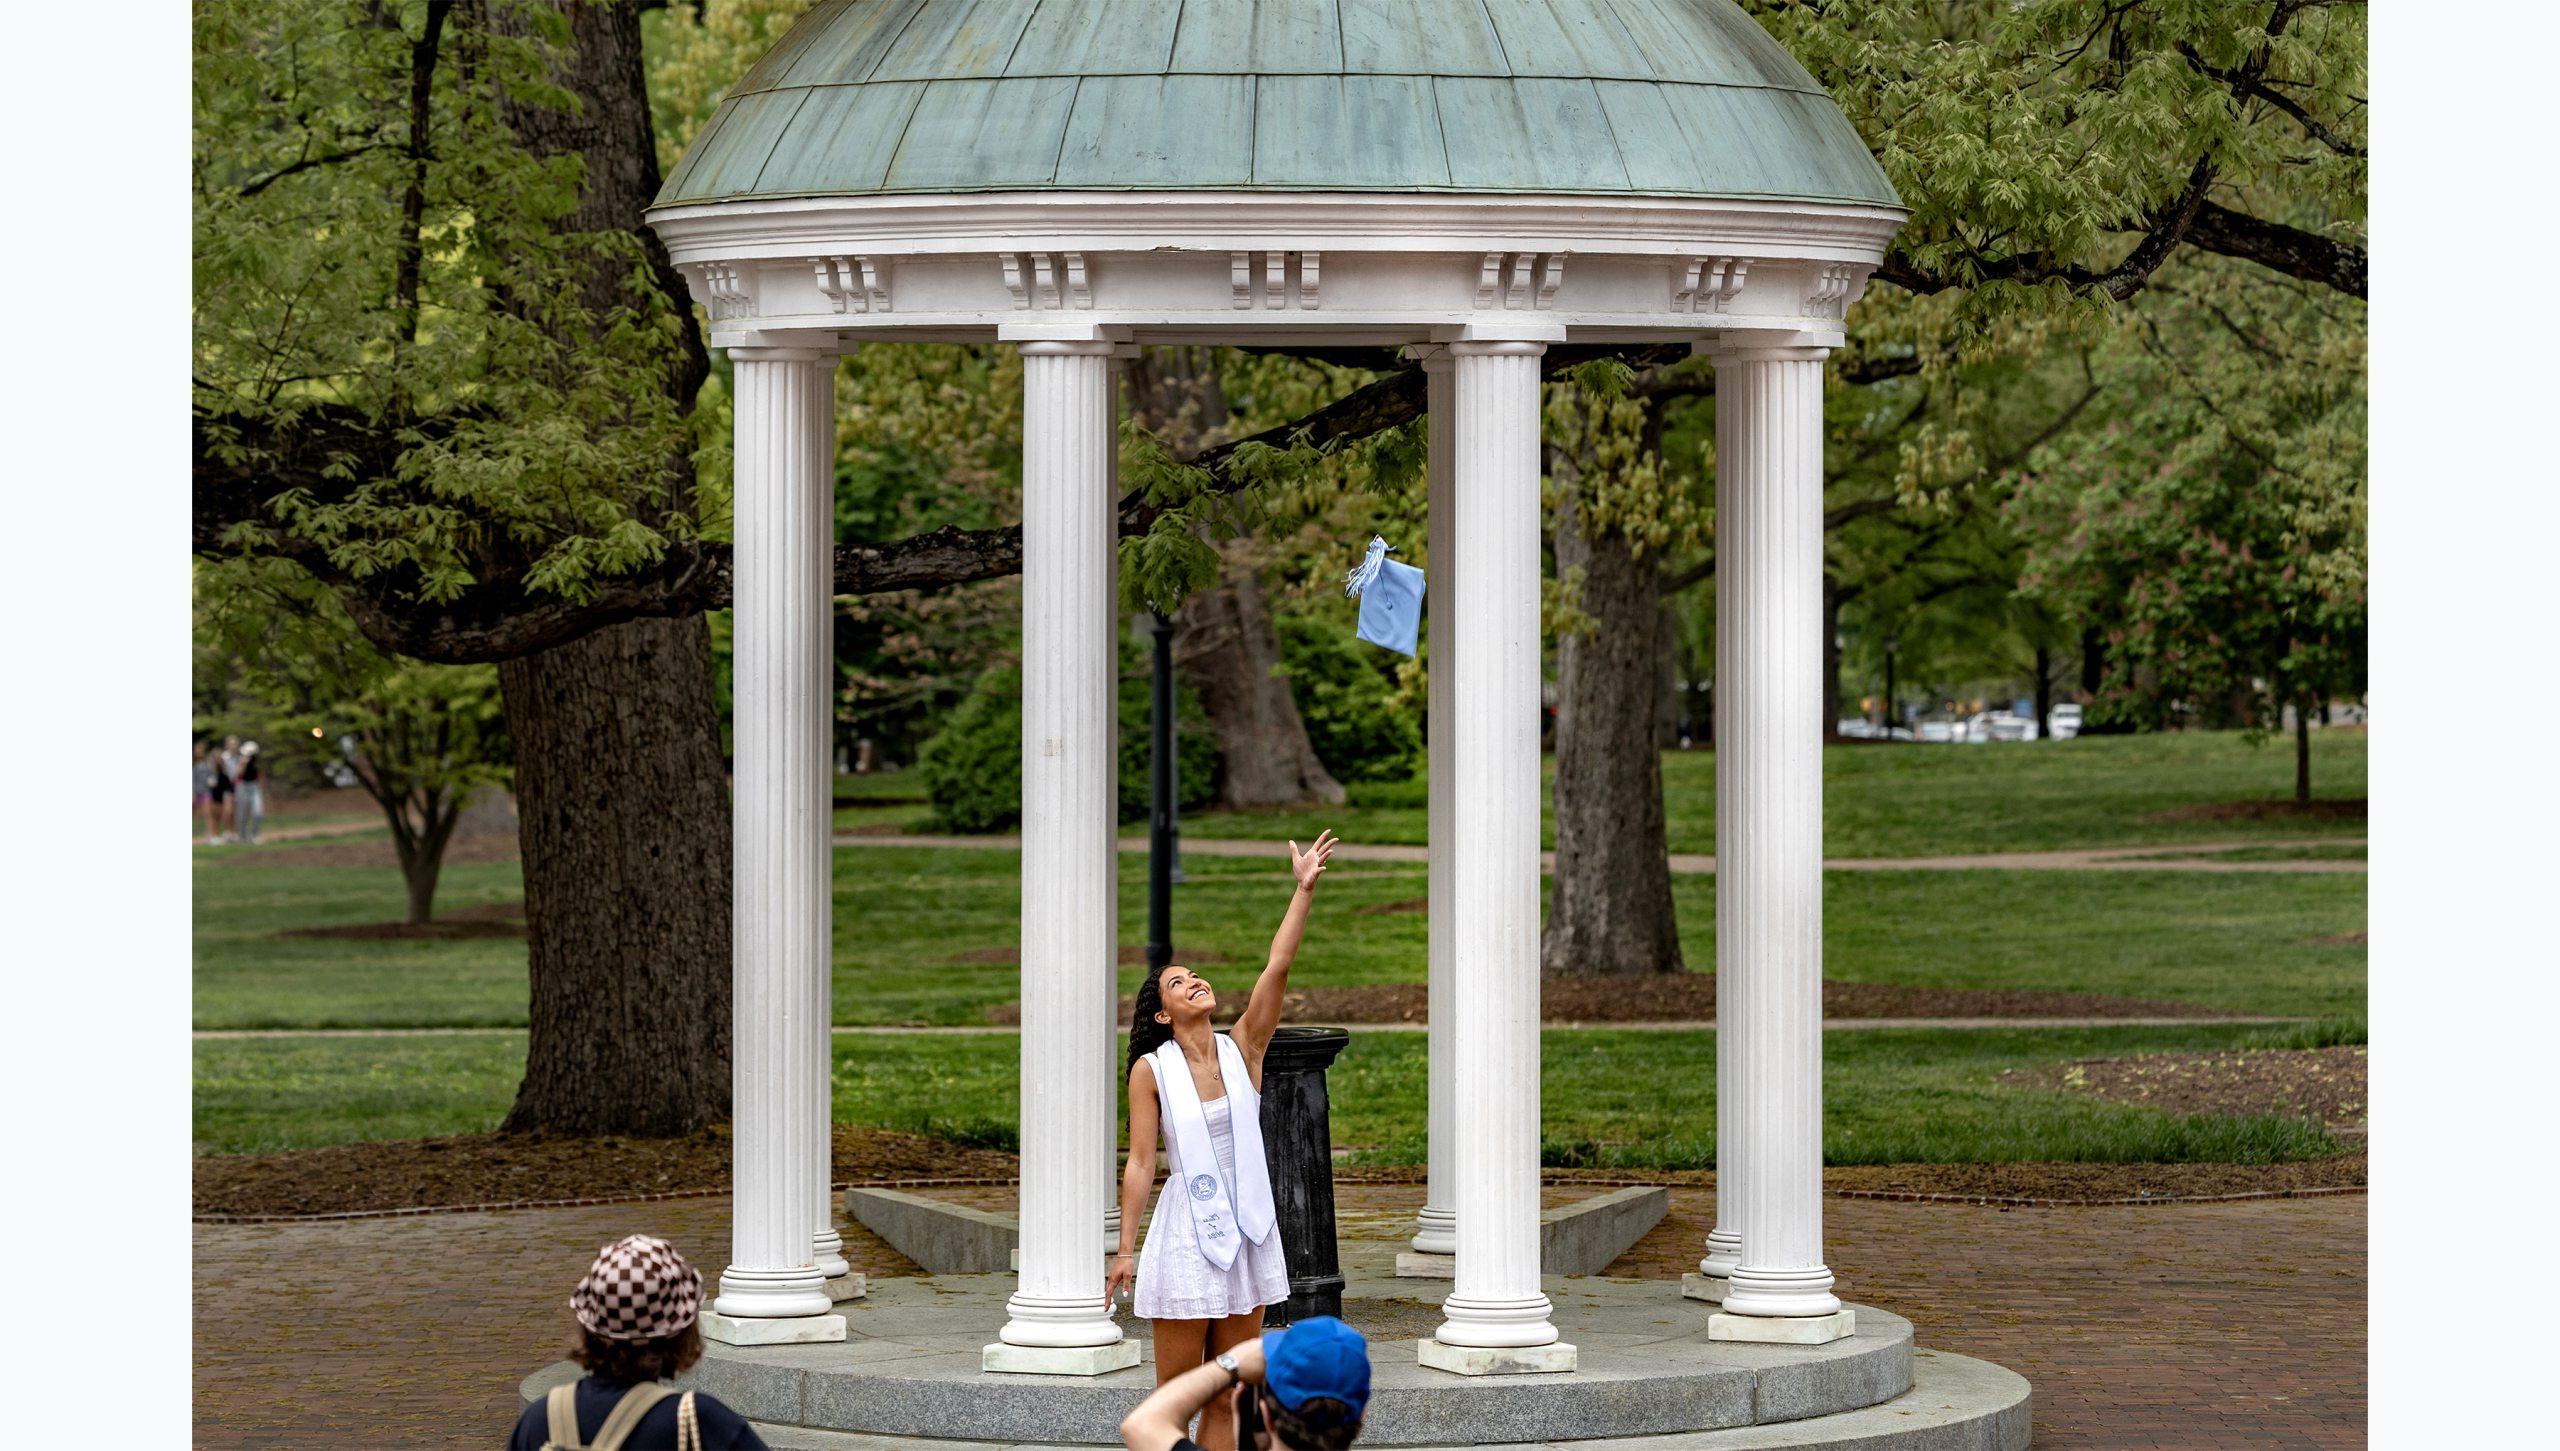 A student tossing her cap up in the air as she poses for a graduation photo at the Old Well.